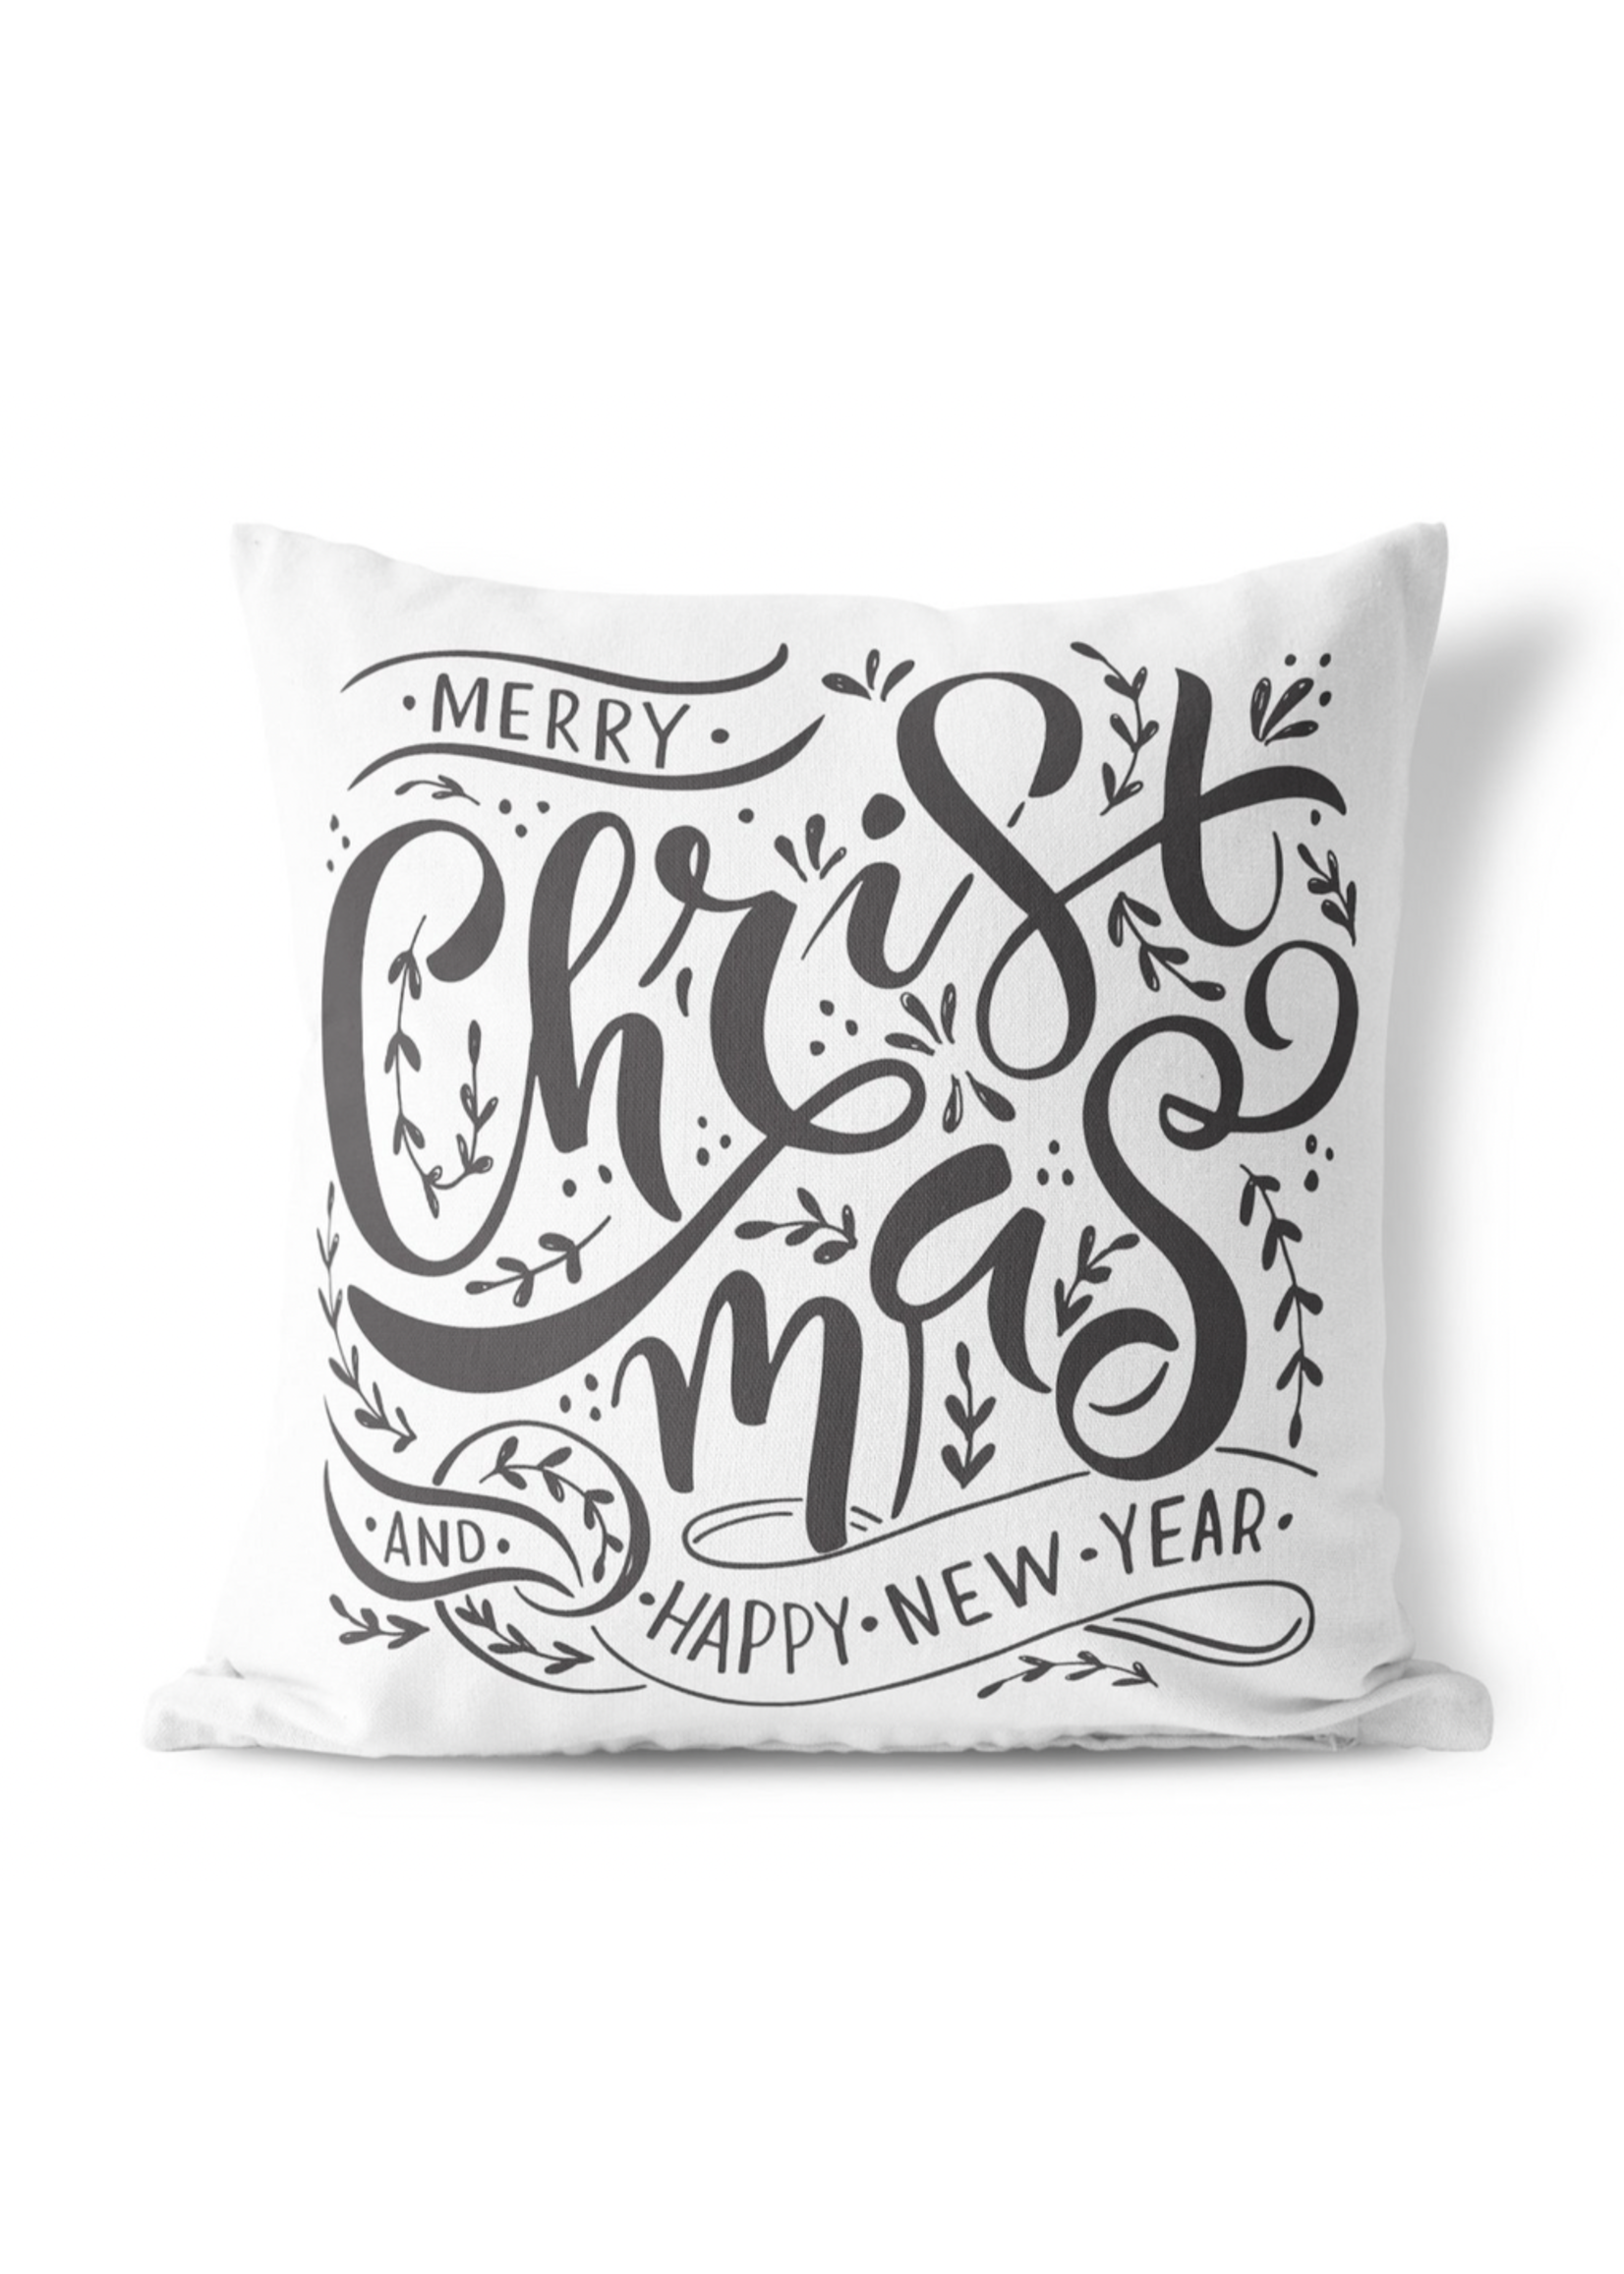 Refinery Number One Merry Christmas Black & White Pillow